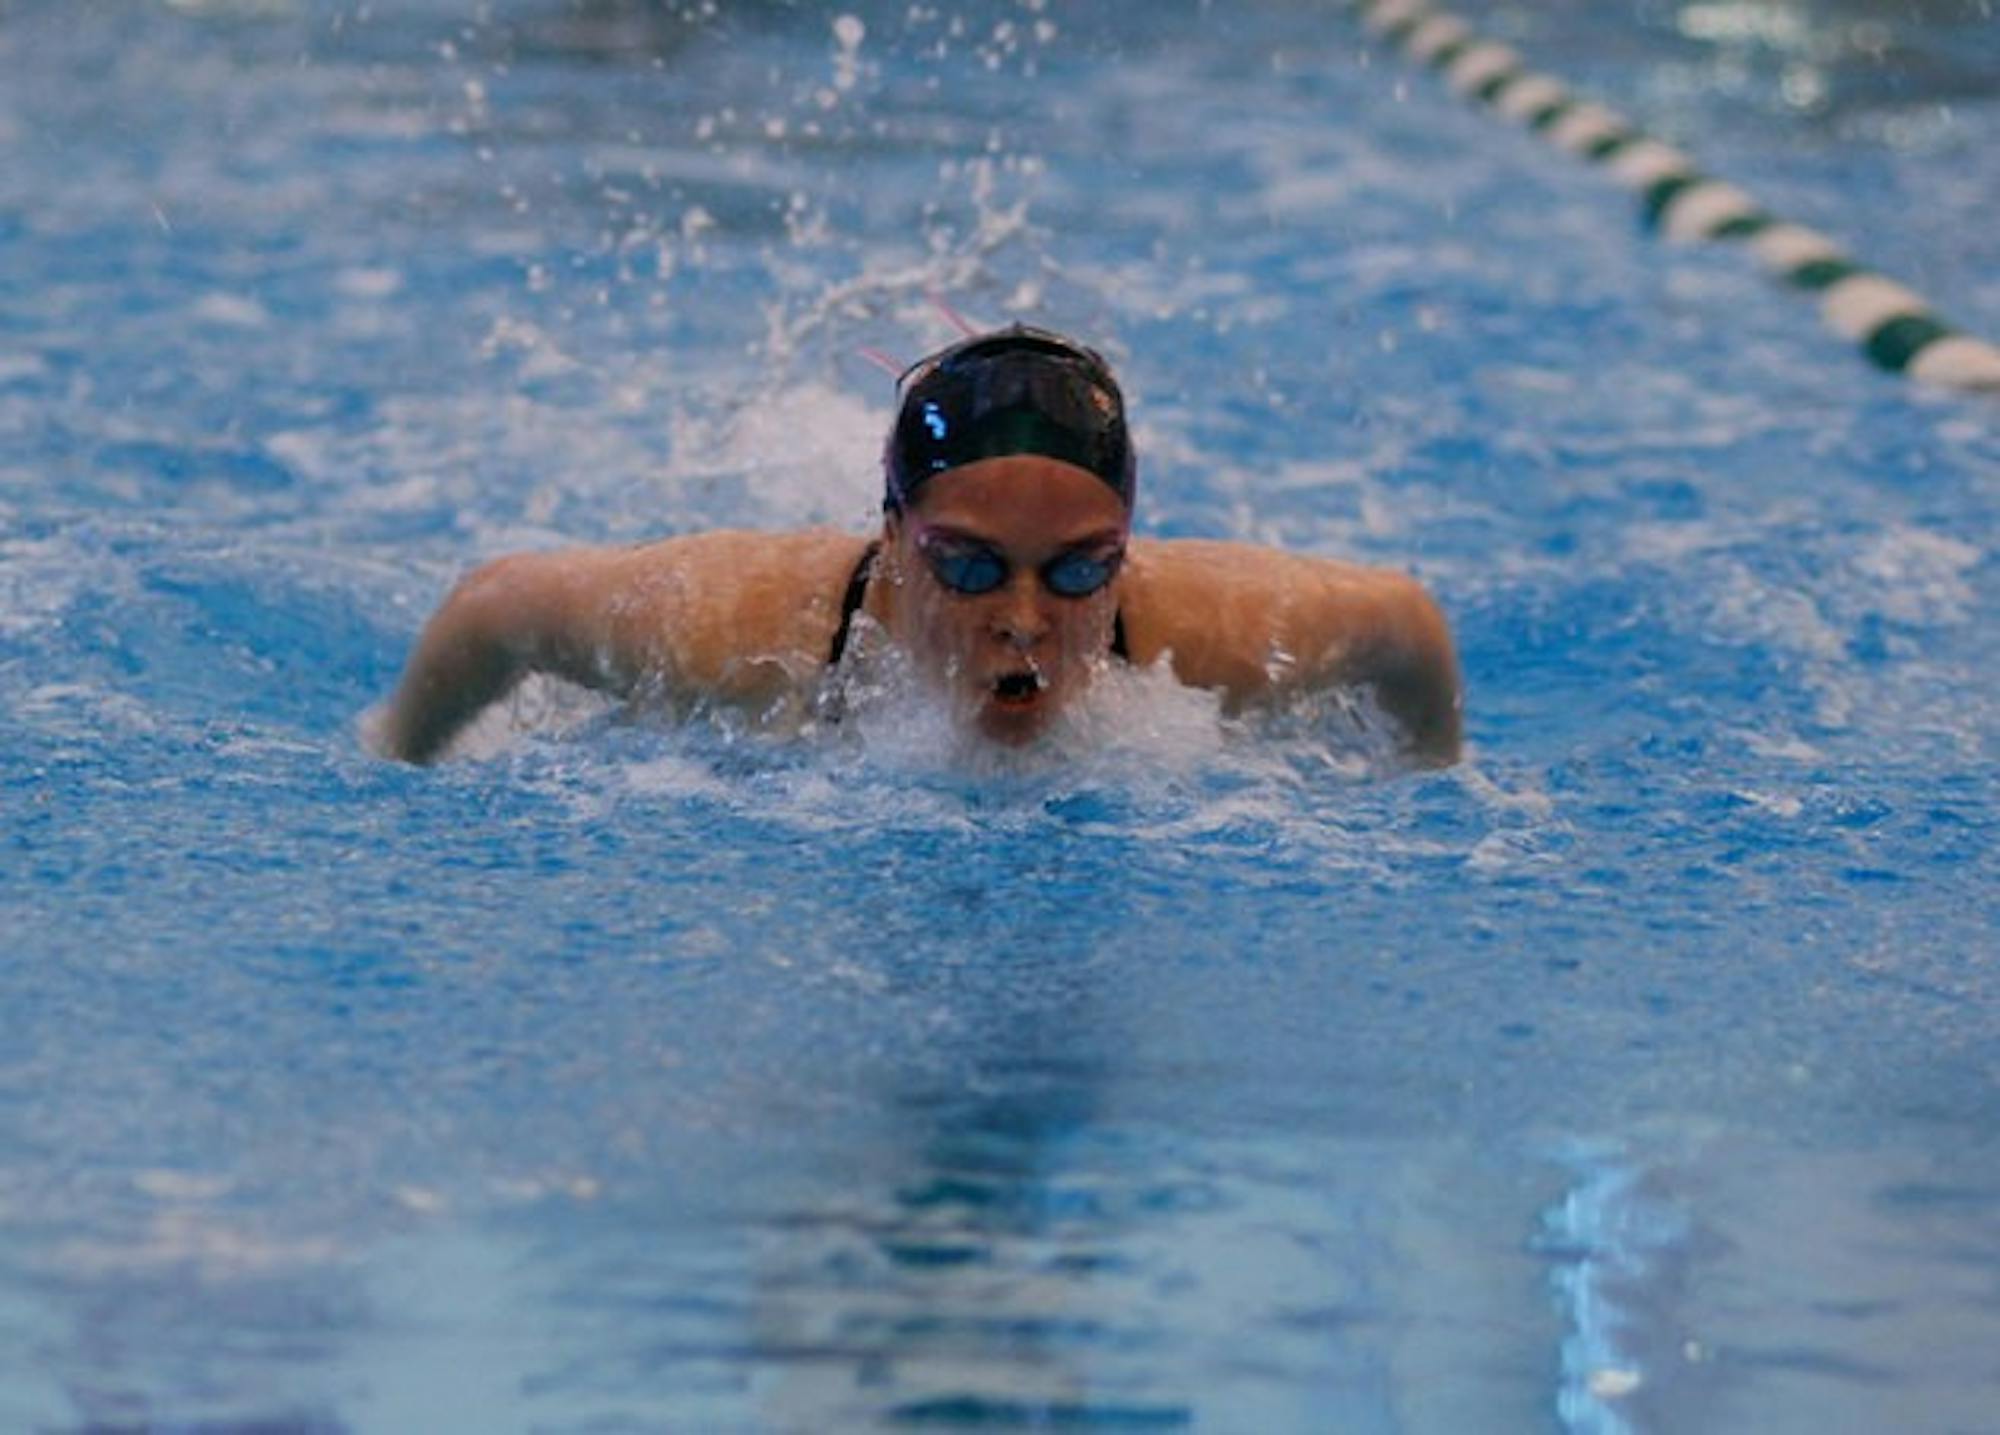 Strong contributions from the freshmen swimmers helped the women to their first victory of the season.